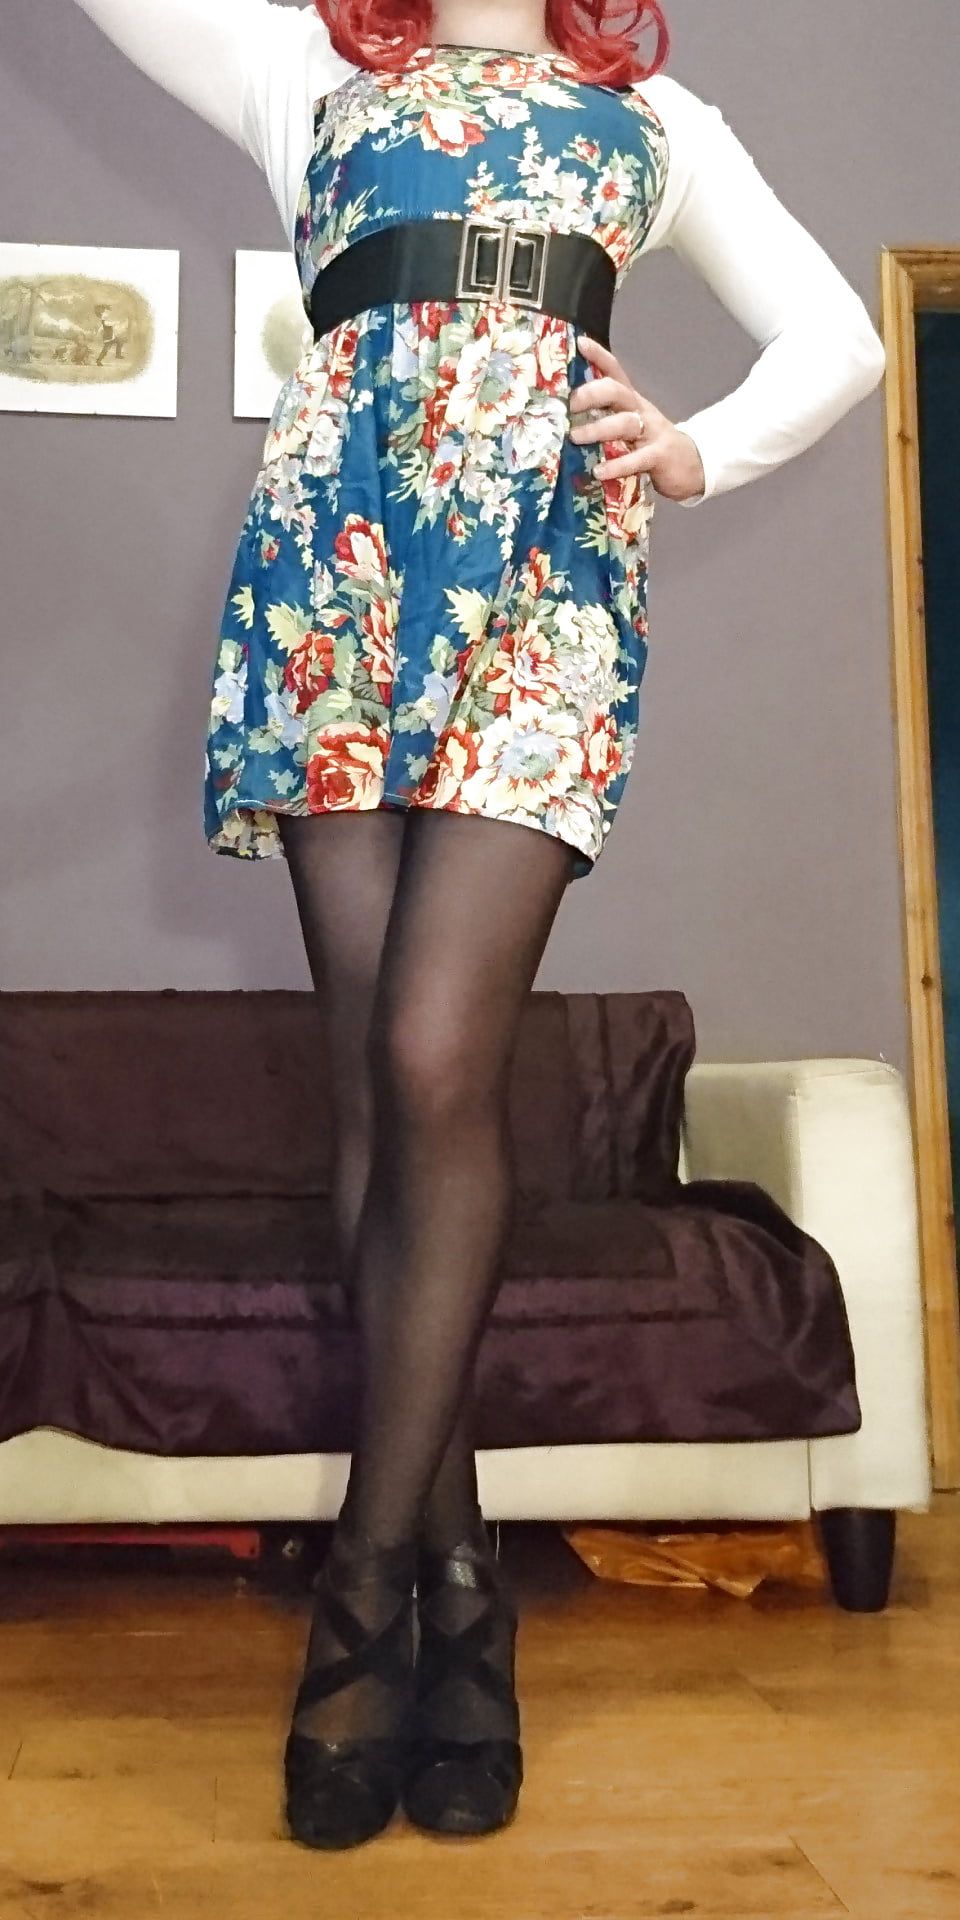 Marie crossdresser in opaque pantyhose and floral dress #2